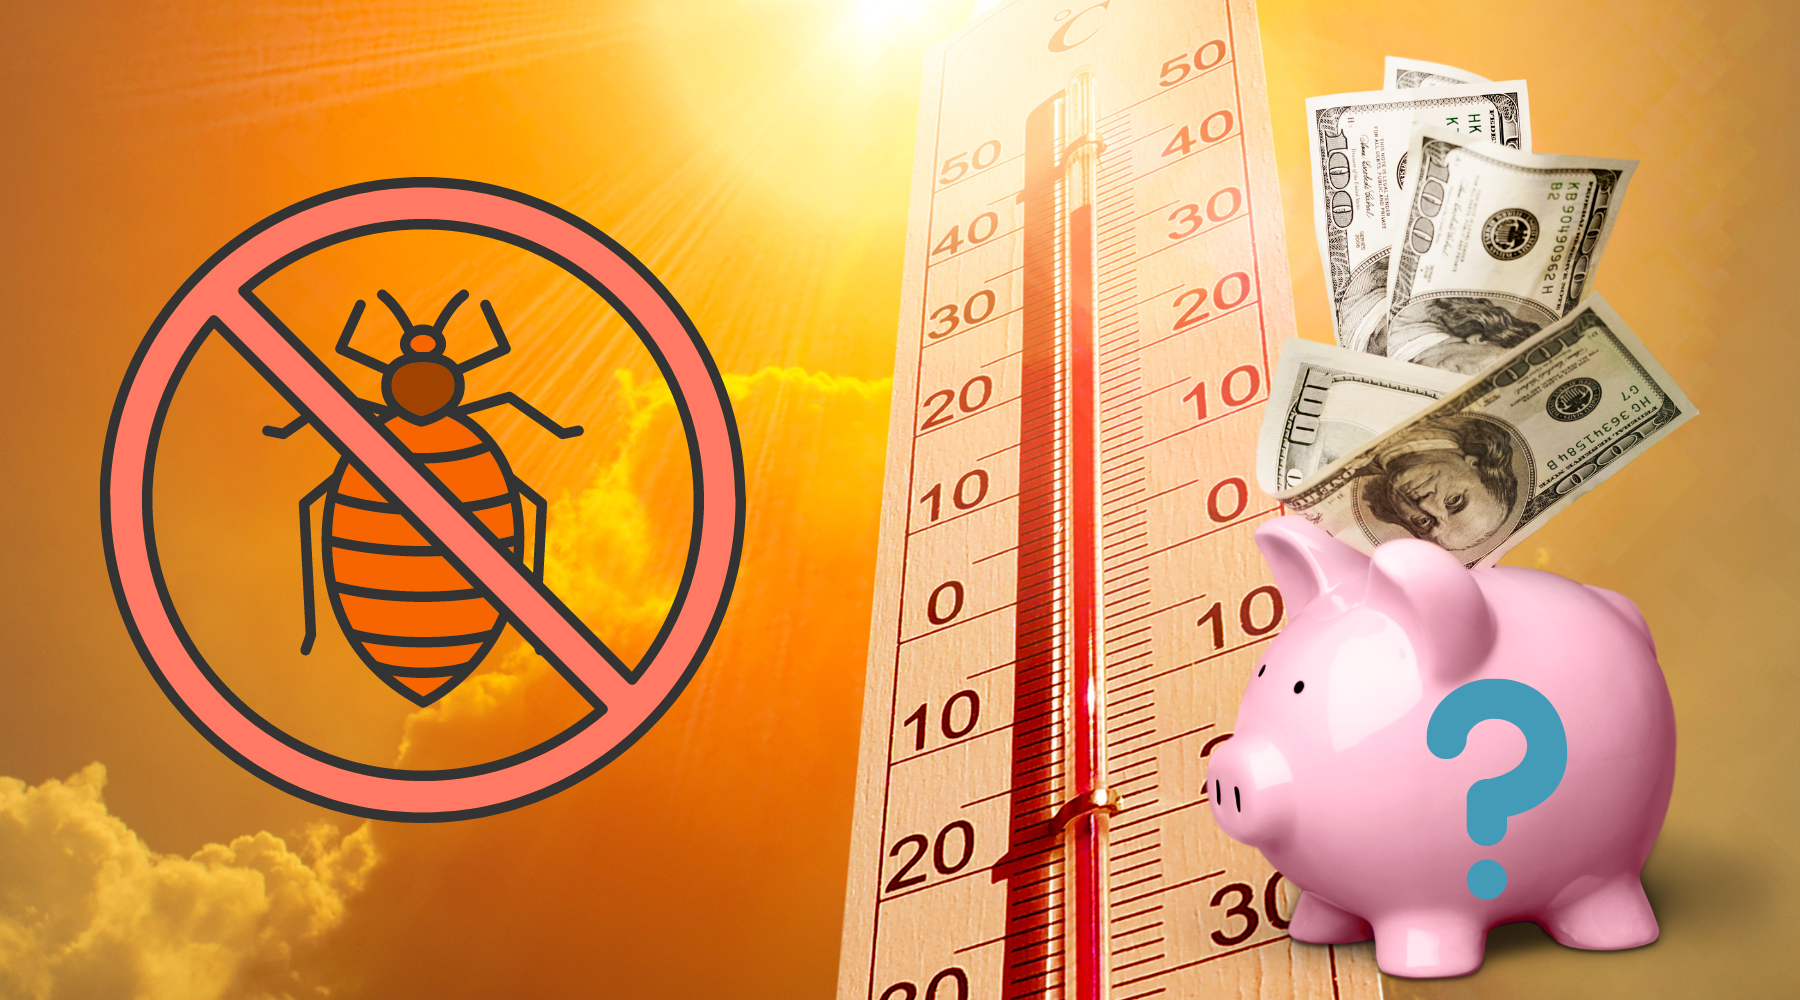 Bed_Bug_Heat_Treatment_Cost_feature